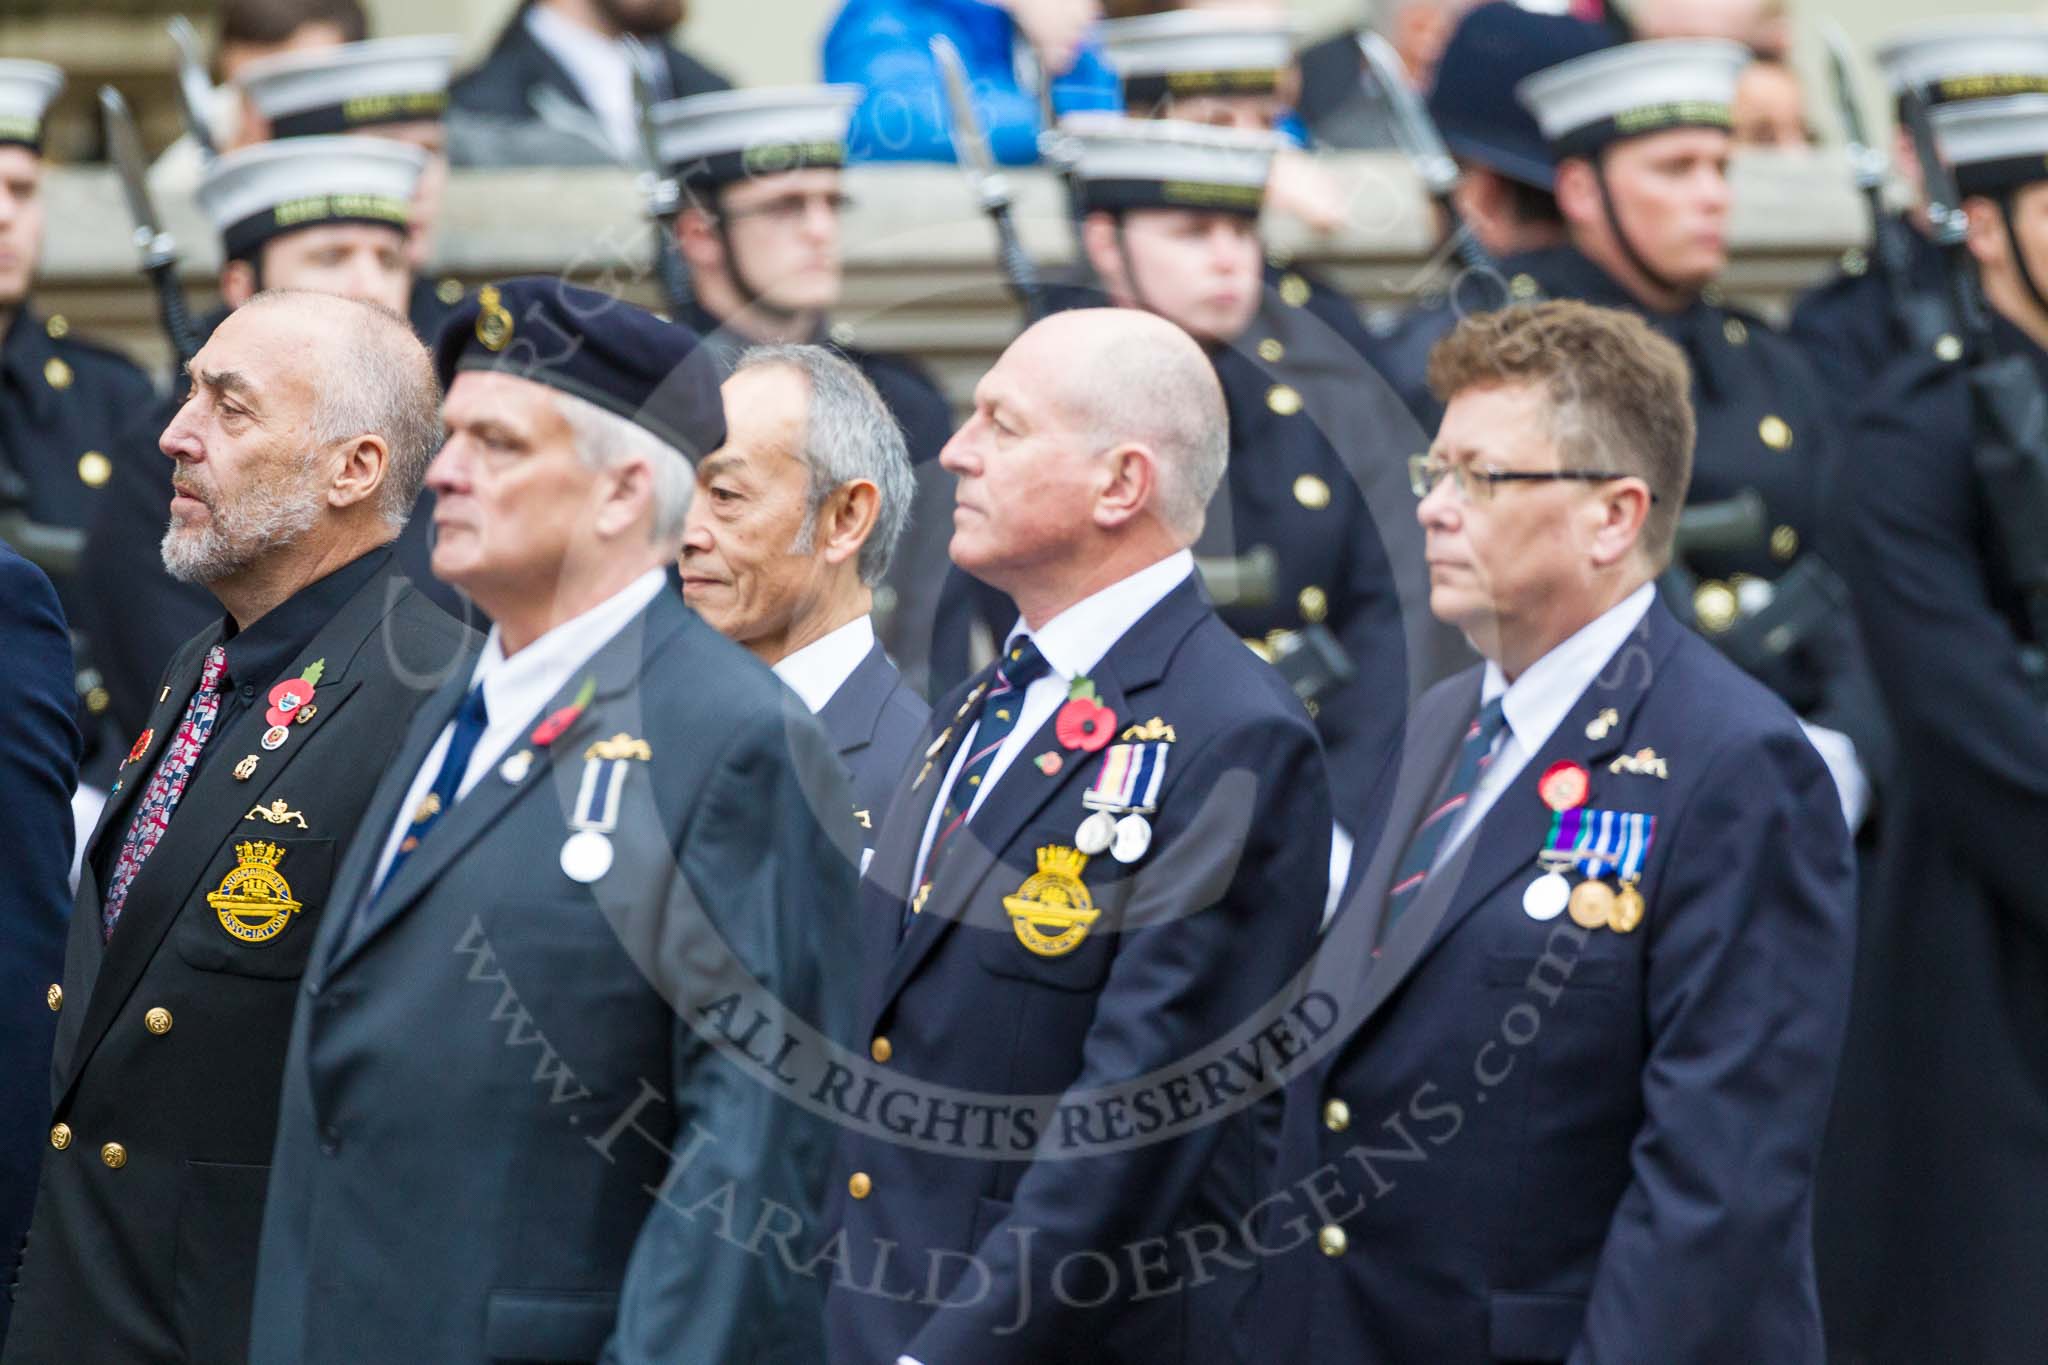 Remembrance Sunday at the Cenotaph 2015: Group E25, Submariners Association.
Cenotaph, Whitehall, London SW1,
London,
Greater London,
United Kingdom,
on 08 November 2015 at 12:02, image #930